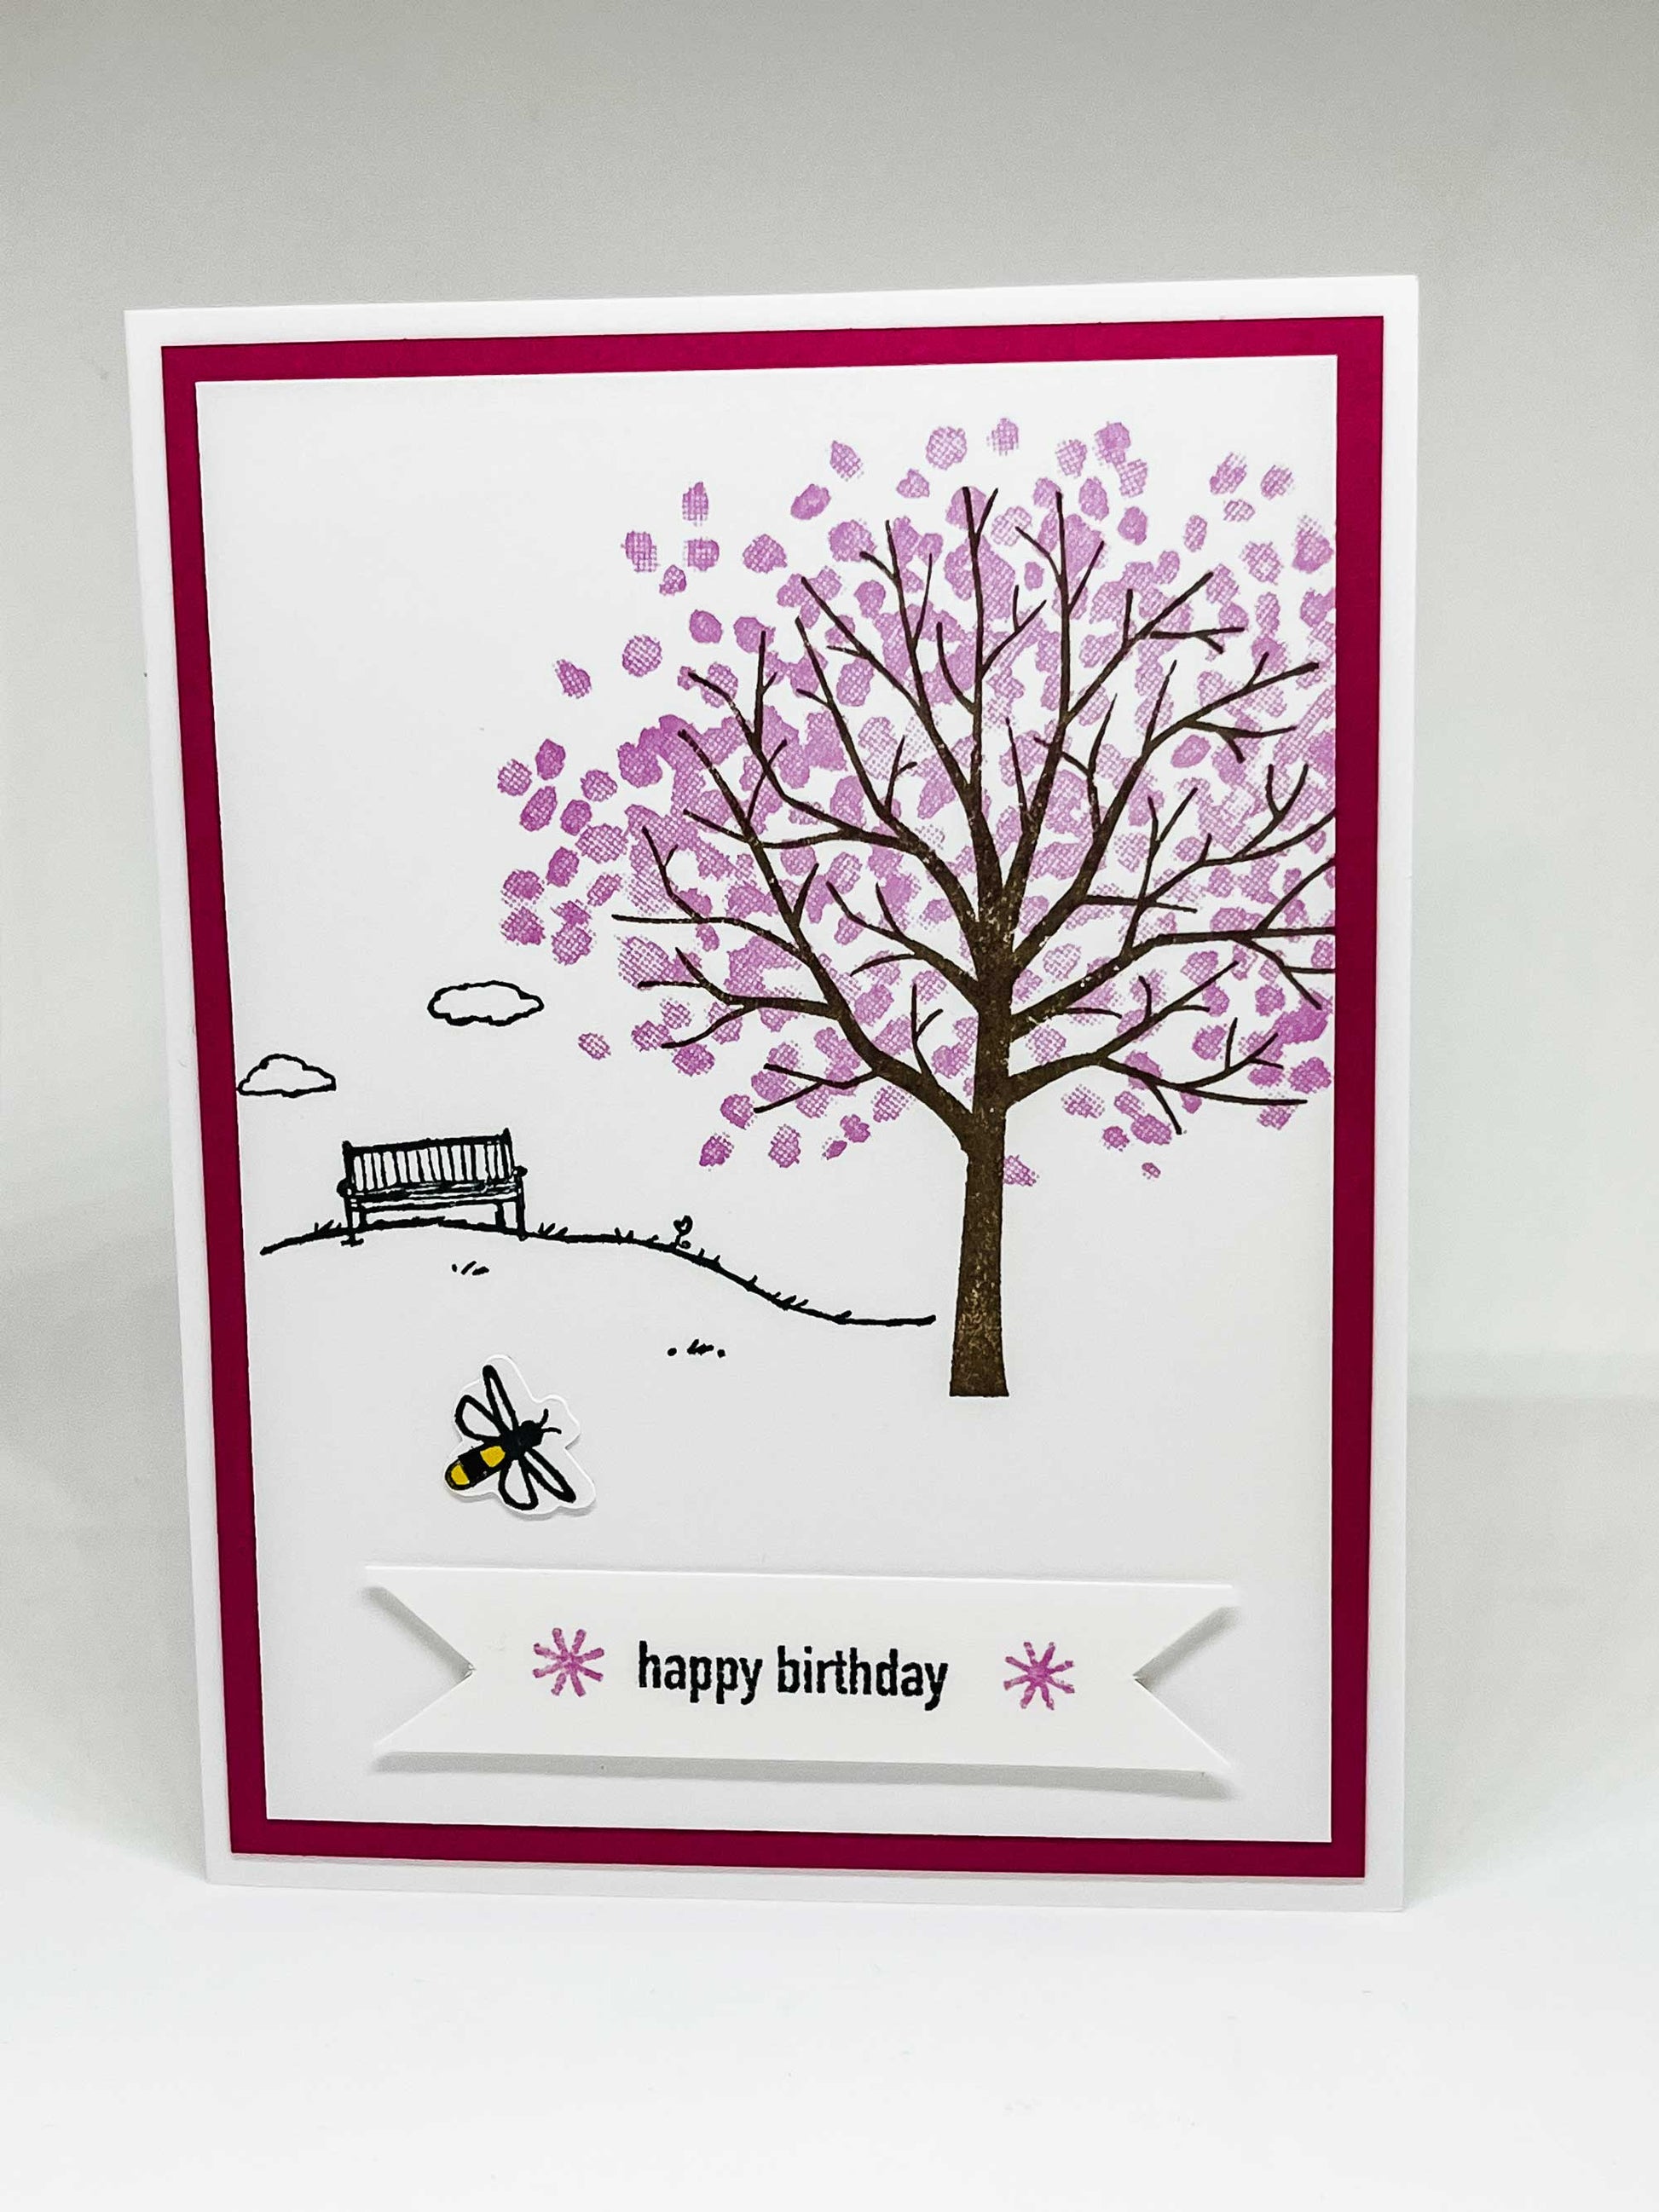 Pop-up greeting card with honeybee flying across a cherry blossom tree and text that says happy birthday